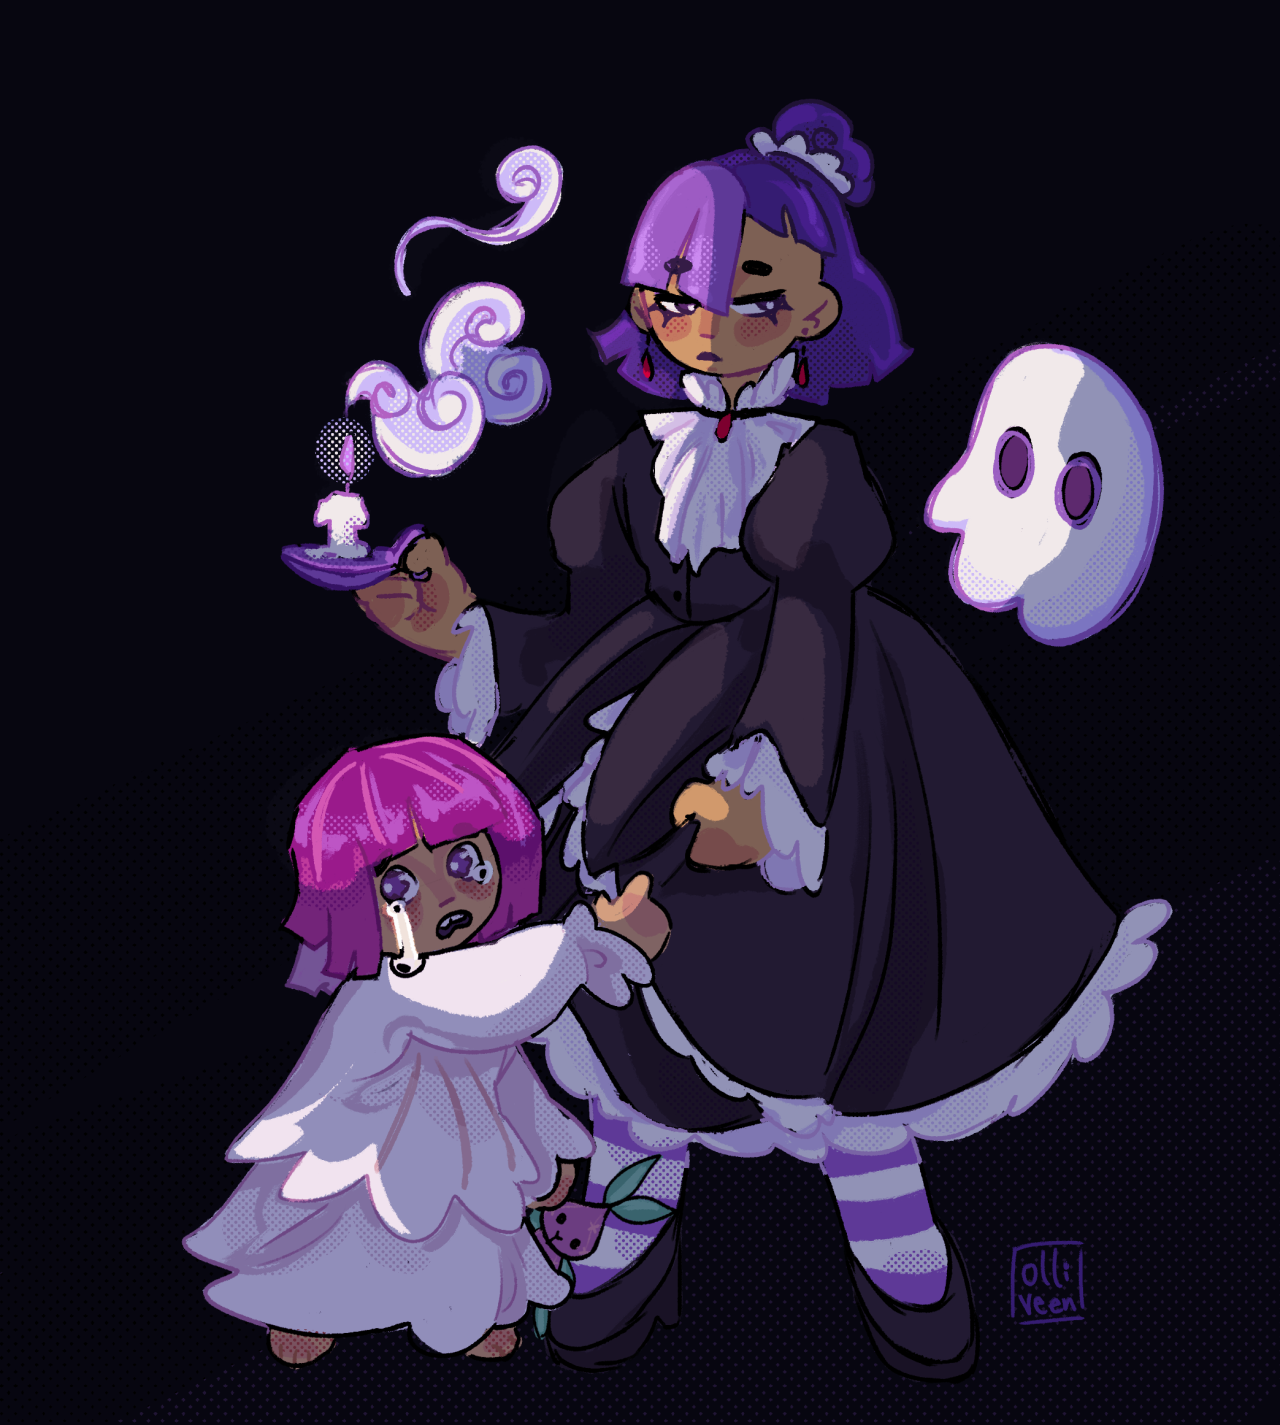 August 27, 2022. blackberry cookie and onion cookie from cookie run